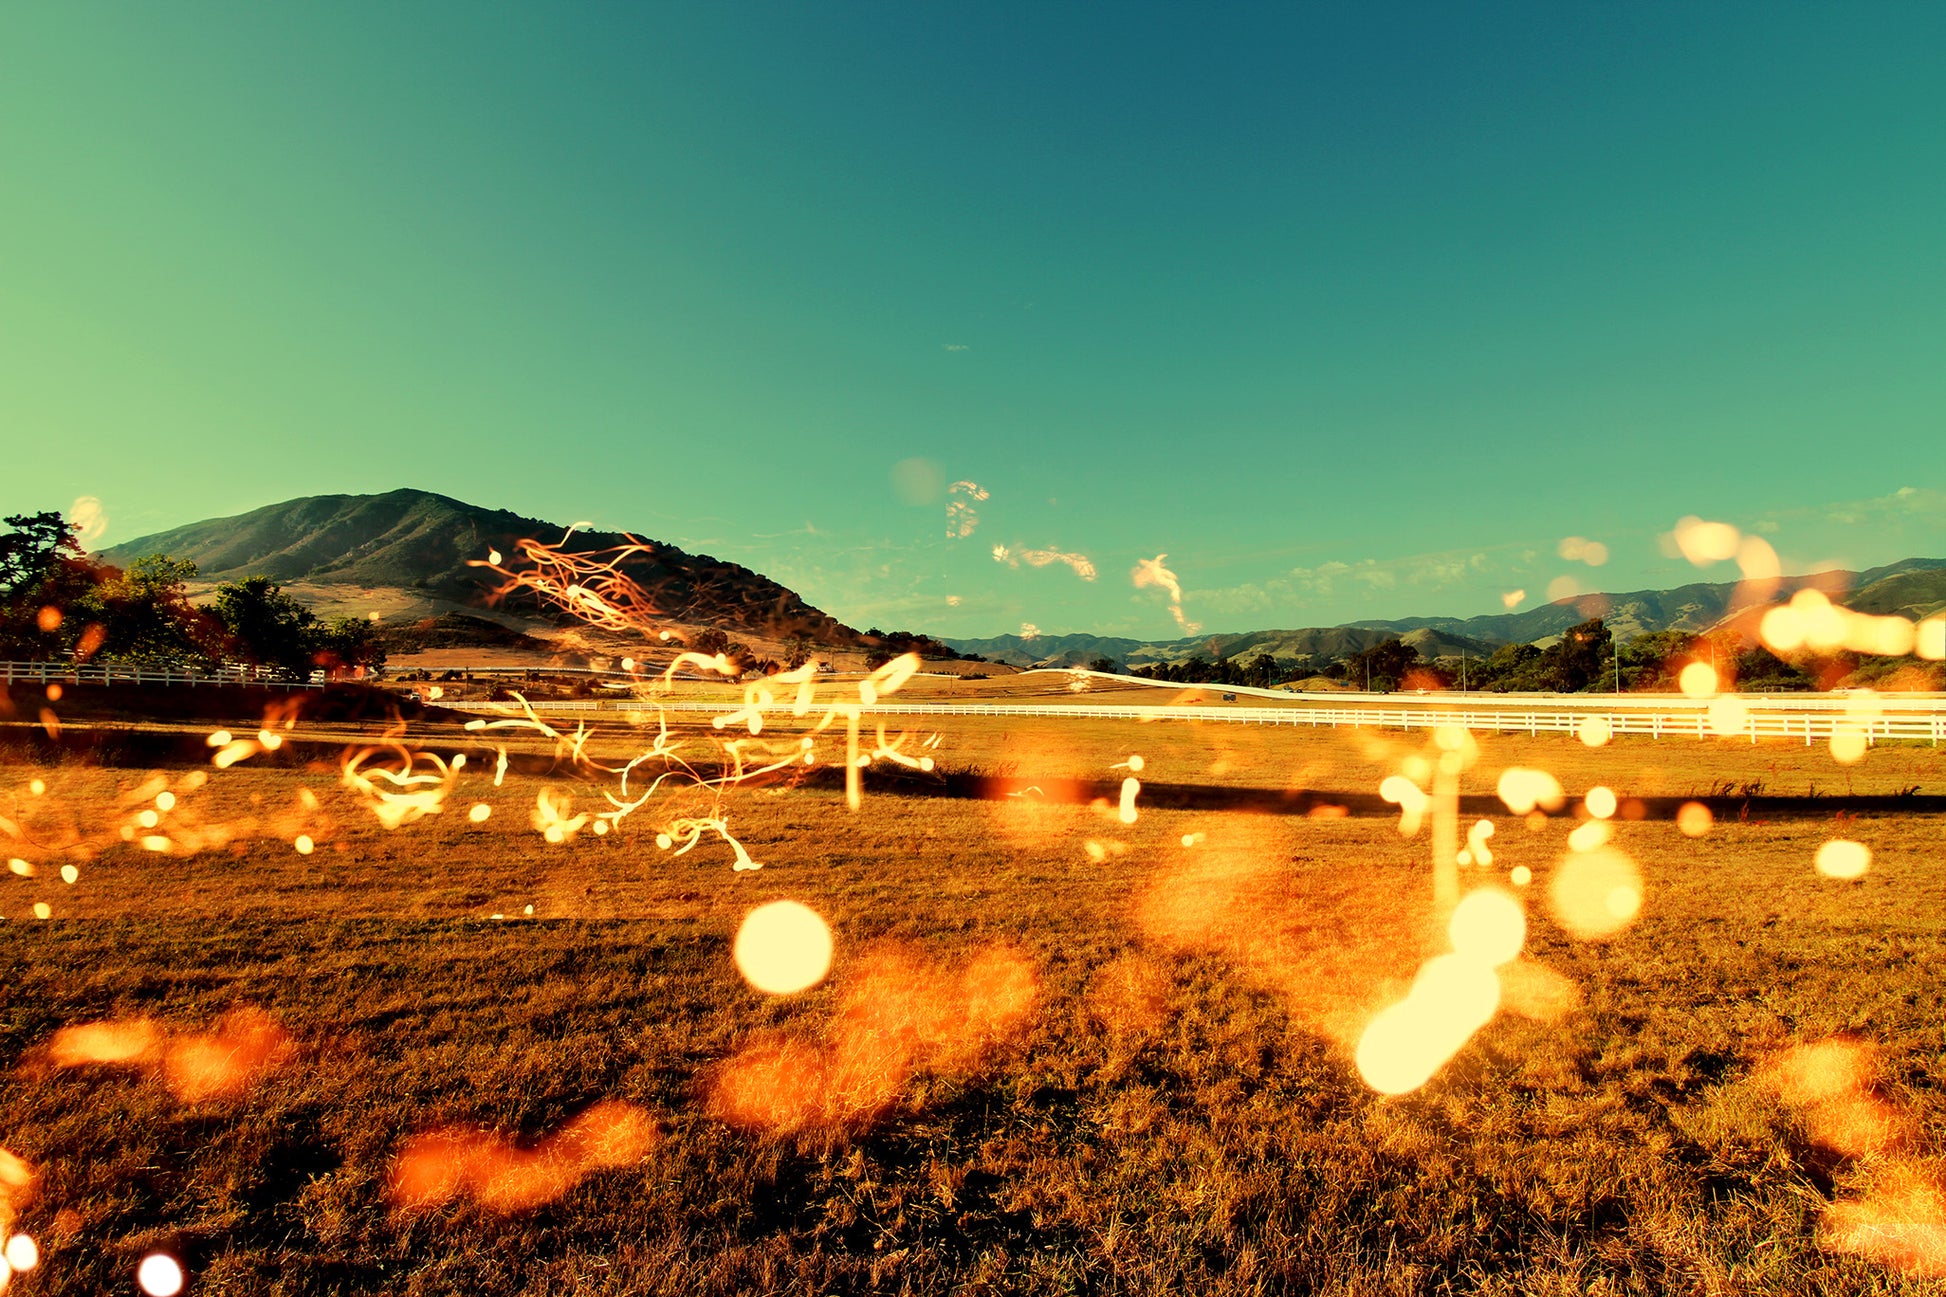 This fine art photograph by Shannon Black captures the breathtaking beauty of the landscape in San Luis Obispo. The image presents a scene of rolling hills and an expansive field, illuminated by the vibrant sky. Adding an ethereal touch to the composition, the landscape is overlayed with captivating light sparks and streaks that create a sense of enchantment and wonder.